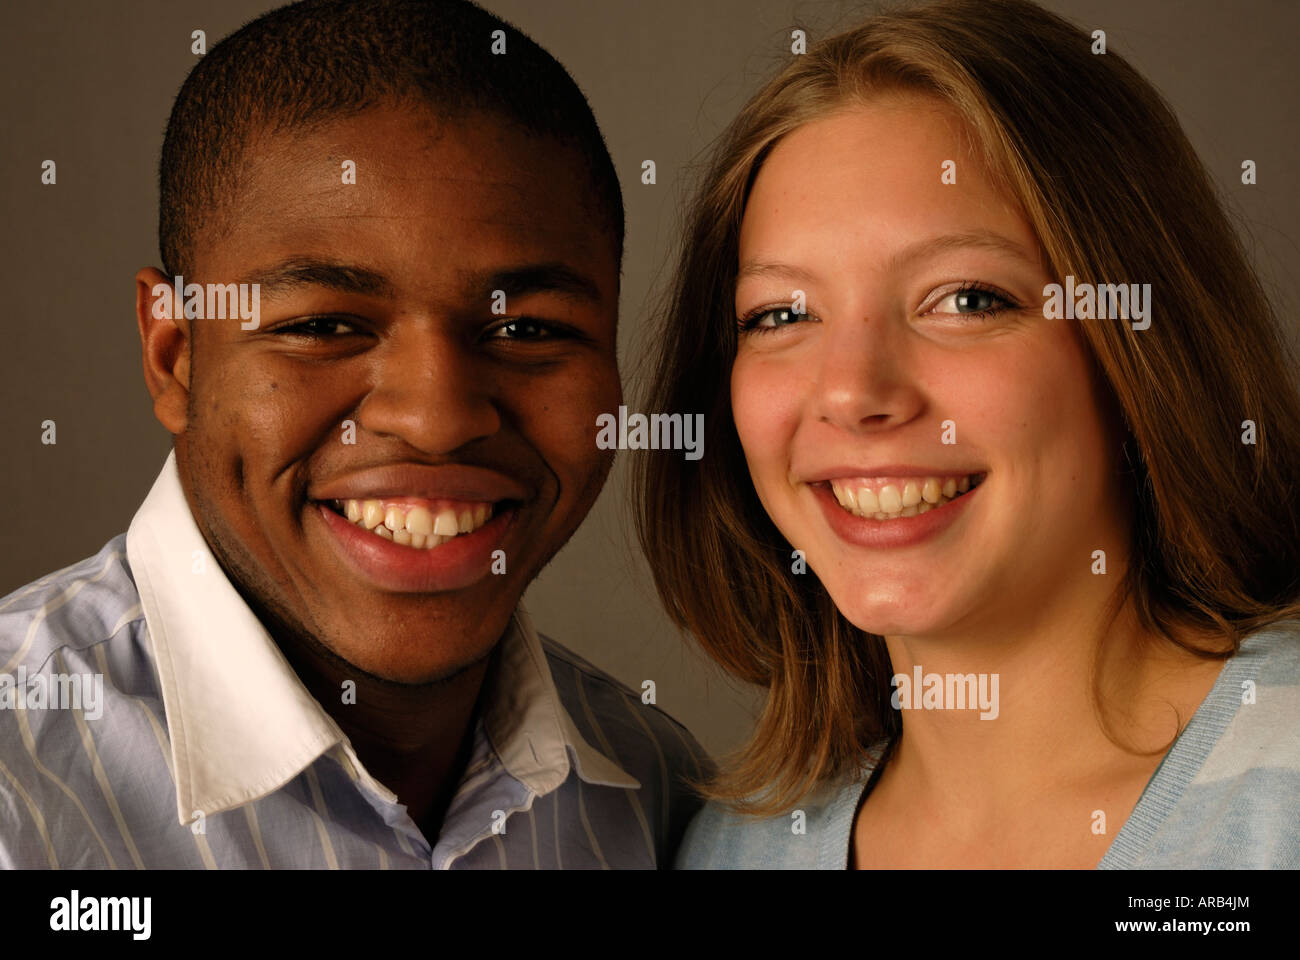 Smiling and laughing young mixed rade couple. Stock Photo